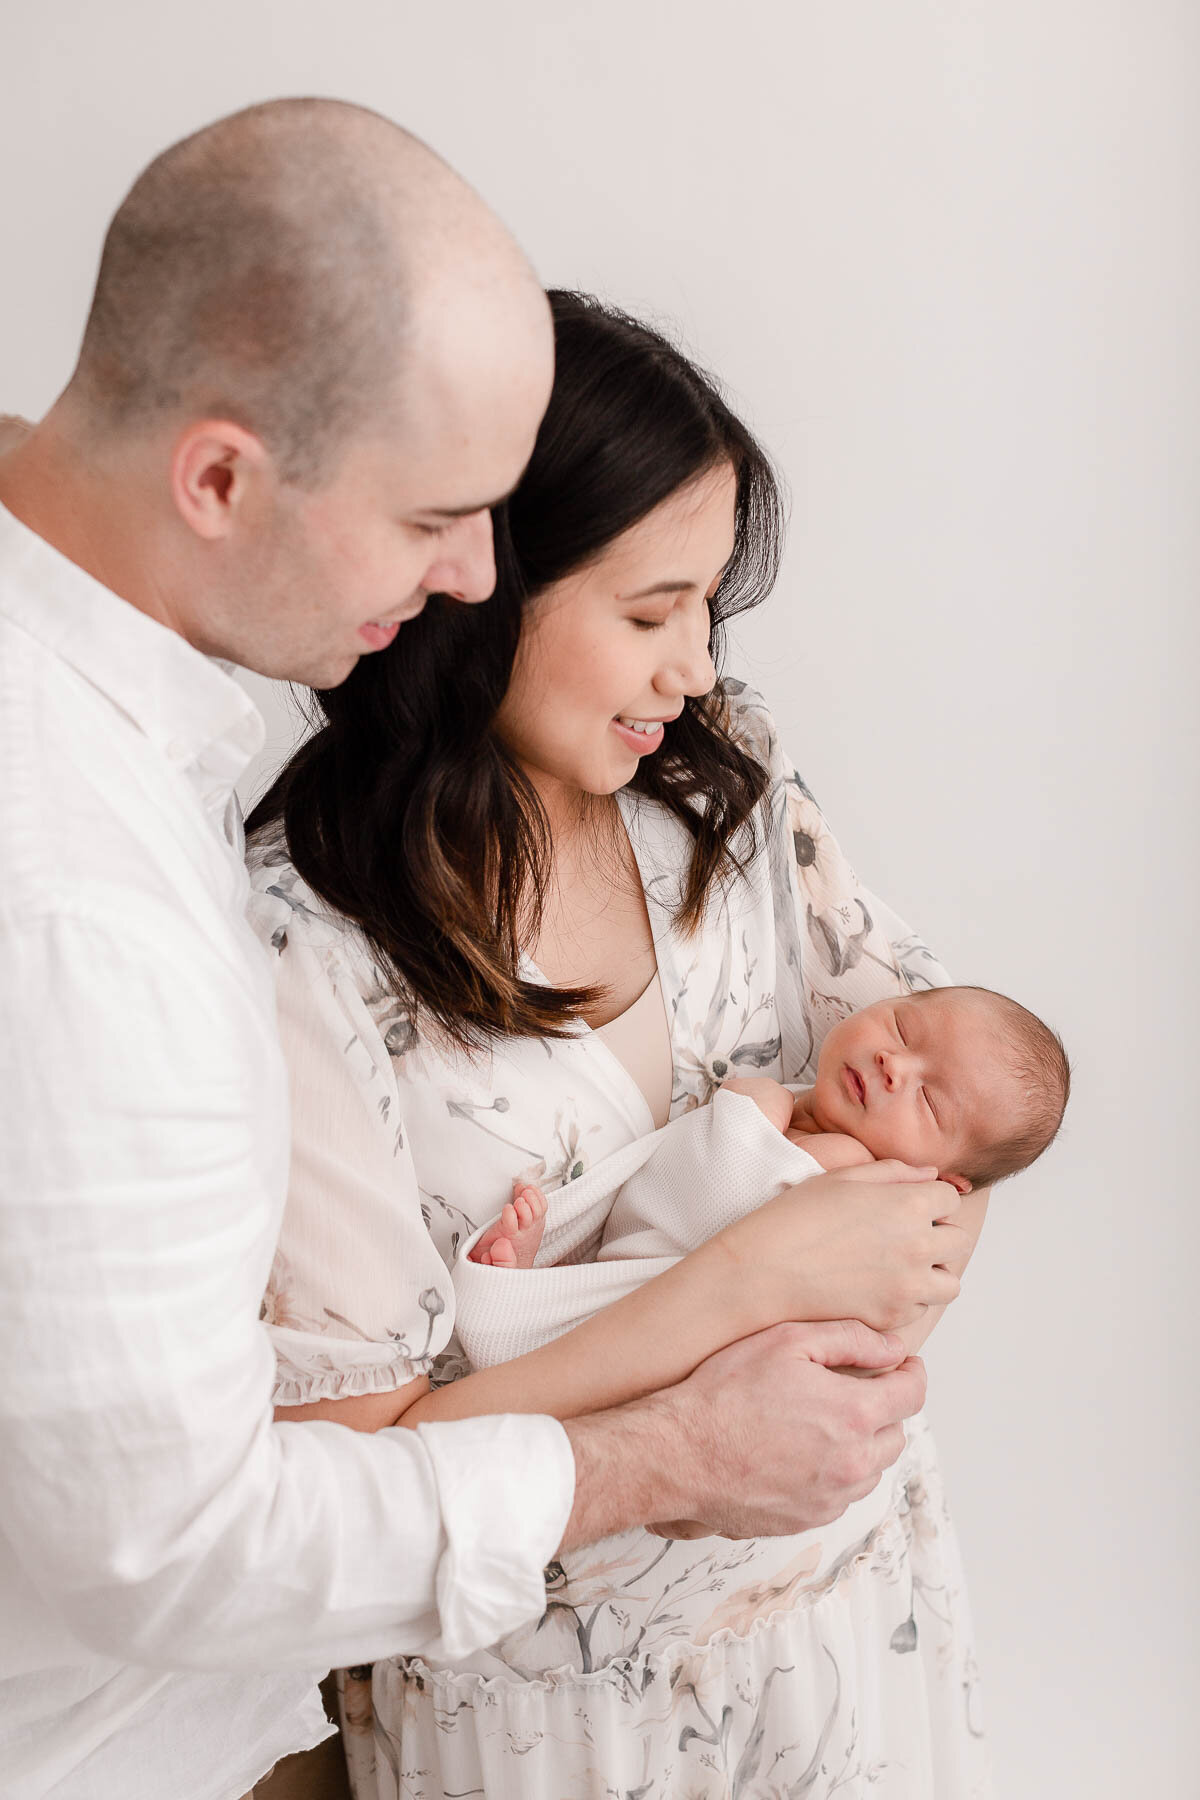 New parents holding newborn baby smiling and looking down at baby.